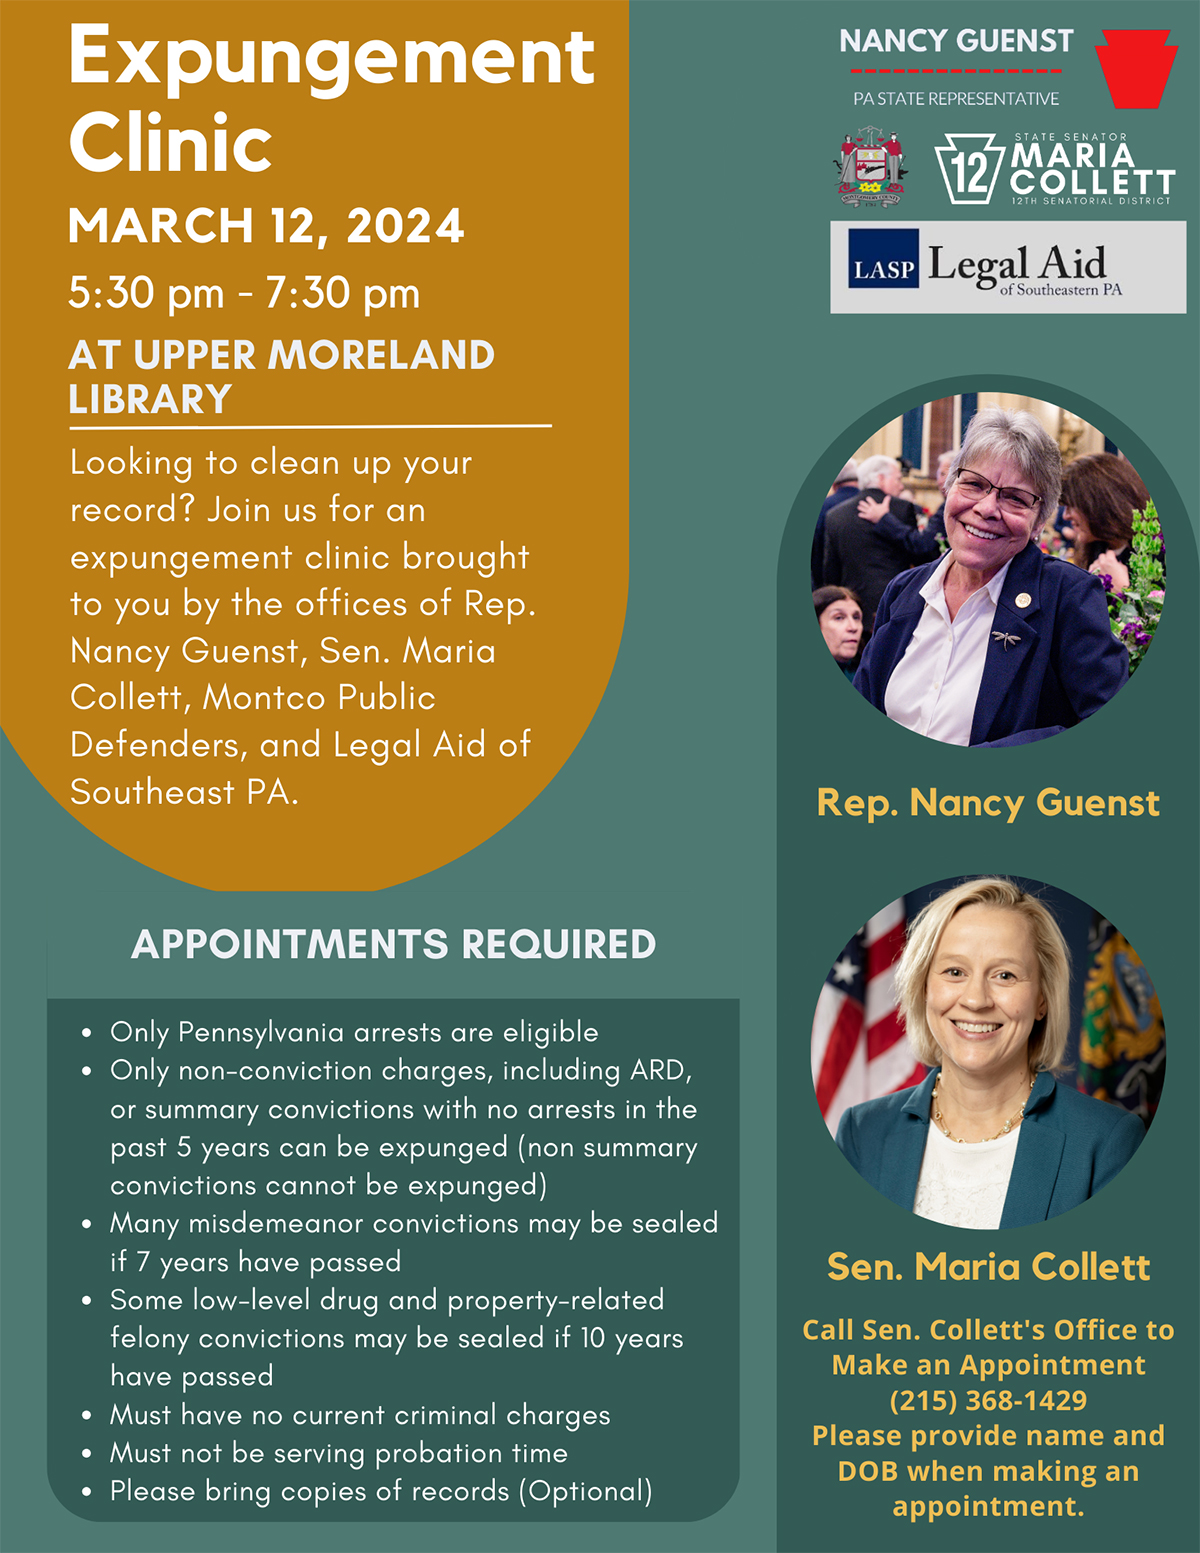 Expungement Clinic - Marzo 12, 2024